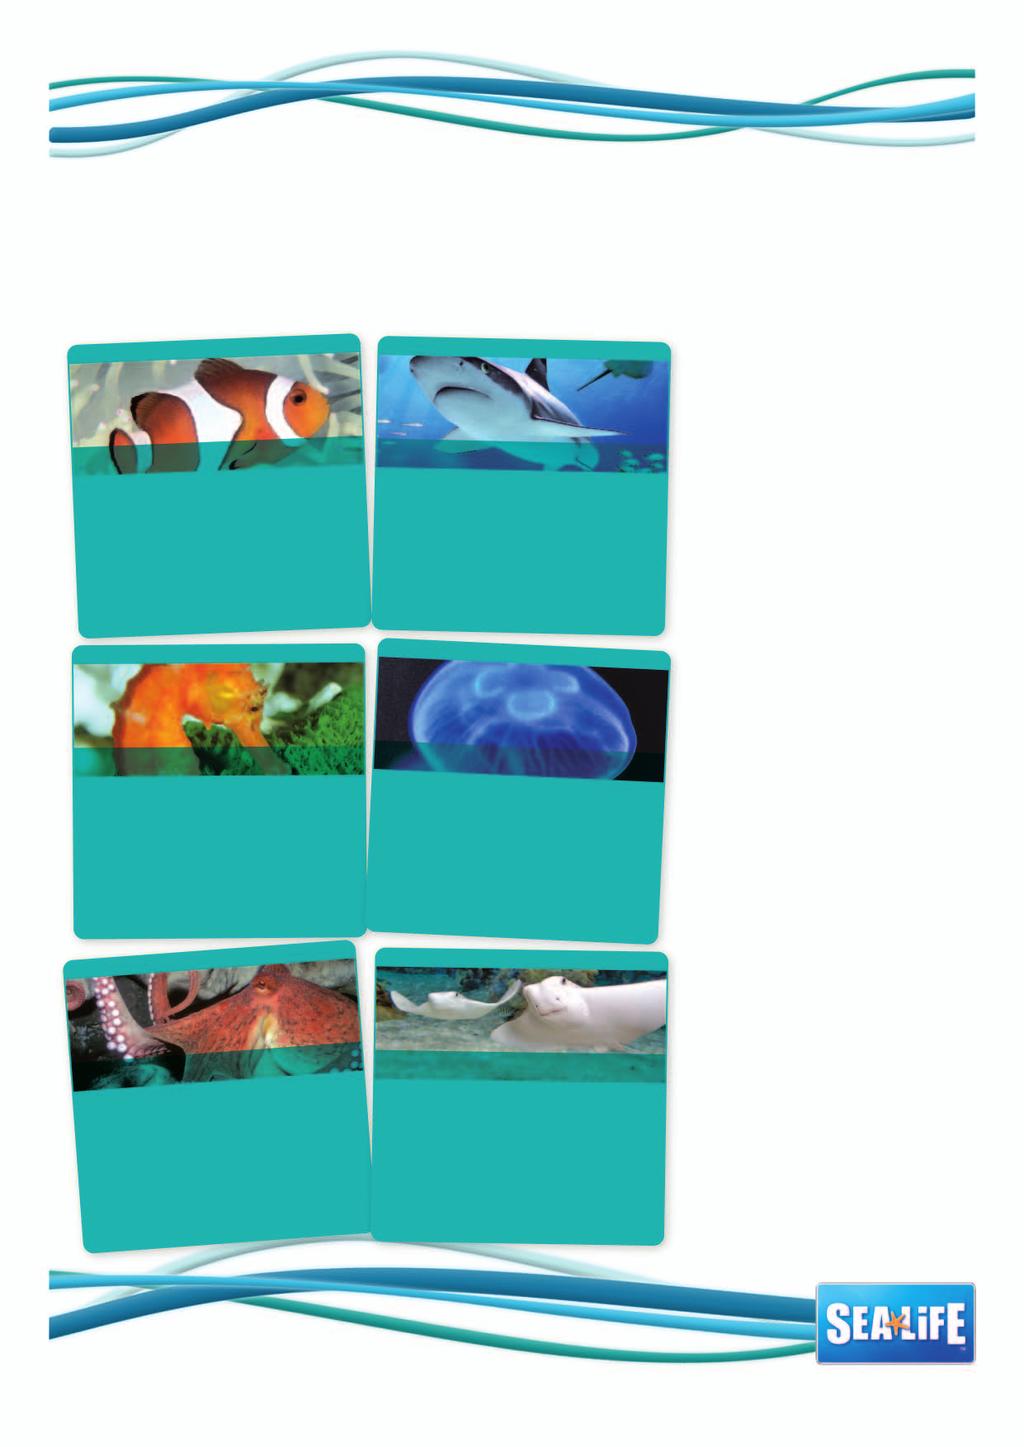 SEA LIFE MIX N MATCH Check out the profile cards below each one shows a creature you ll see on your SEA LIFE centre visit. How much do you know about them?